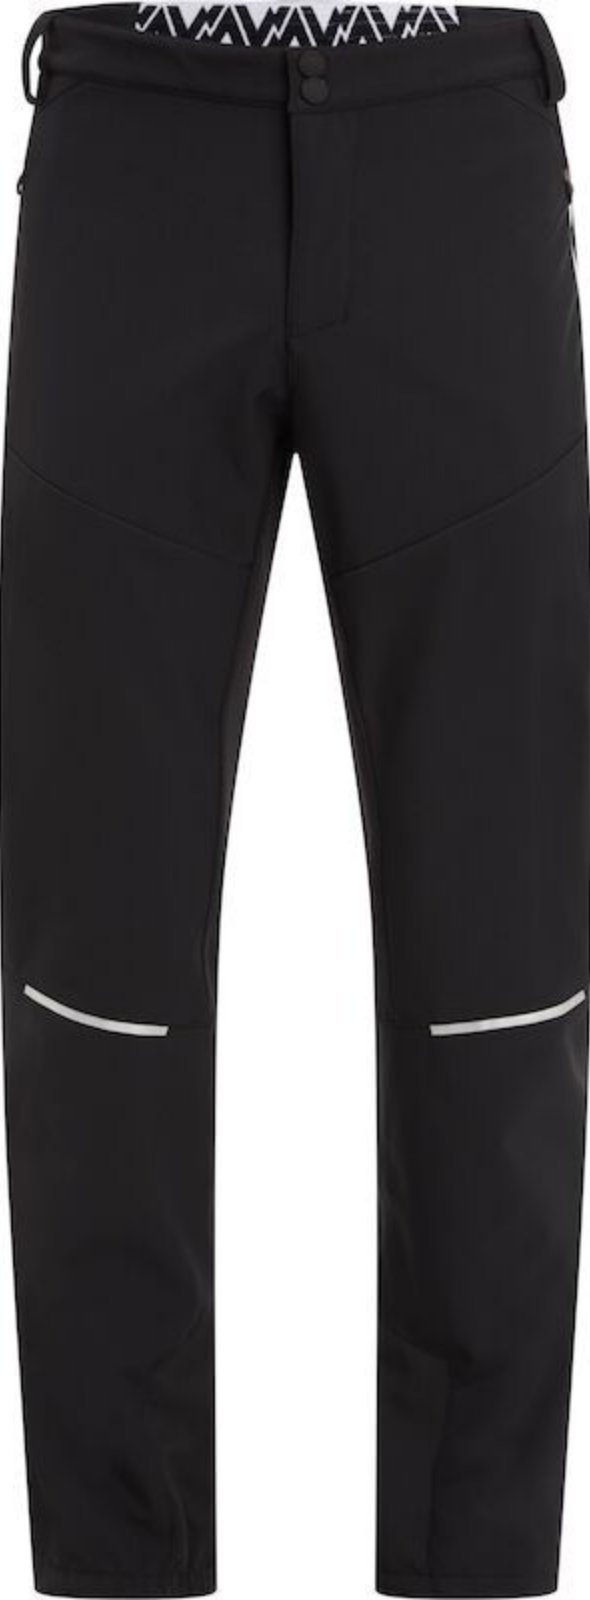 McKINLEY Outdoorhose Saina He.-Funktions-Jacke M PNT